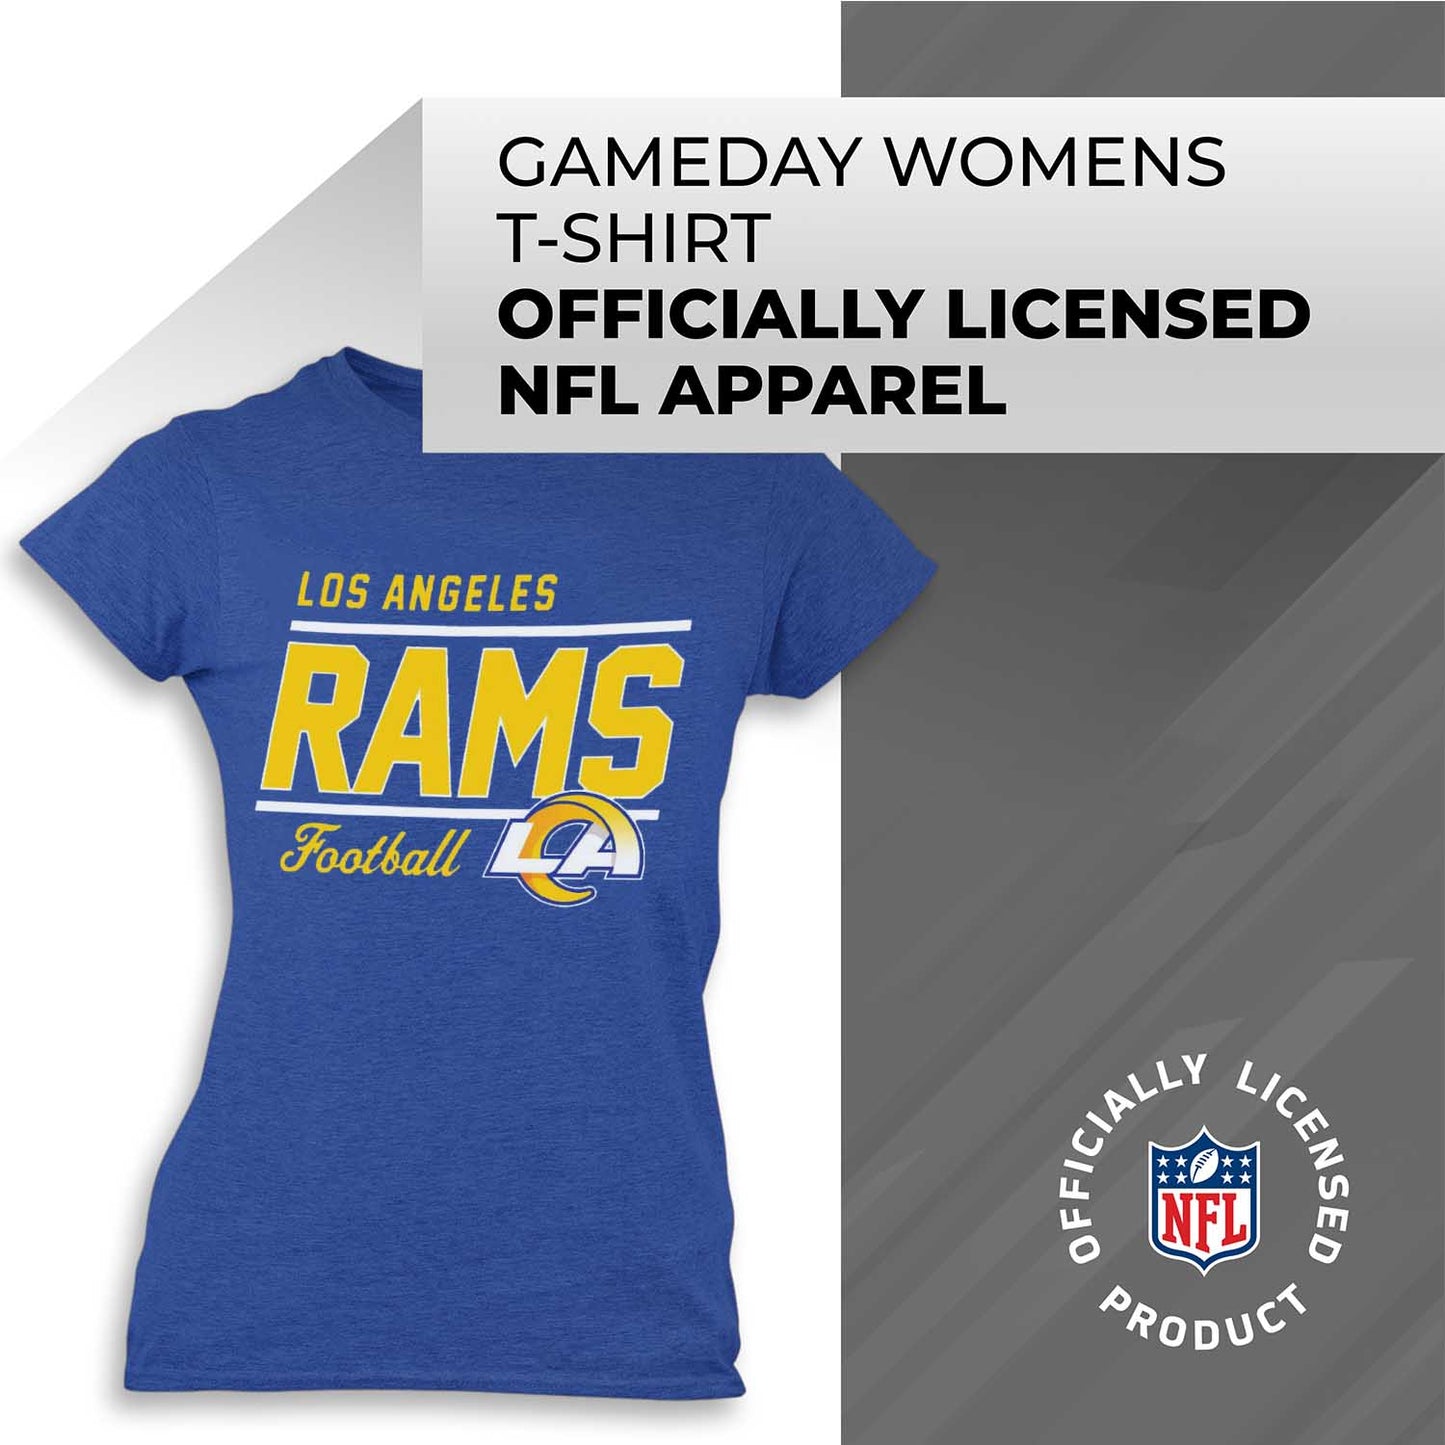 Los Angeles Rams NFL Gameday Women's Relaxed Fit T-shirt - Royal